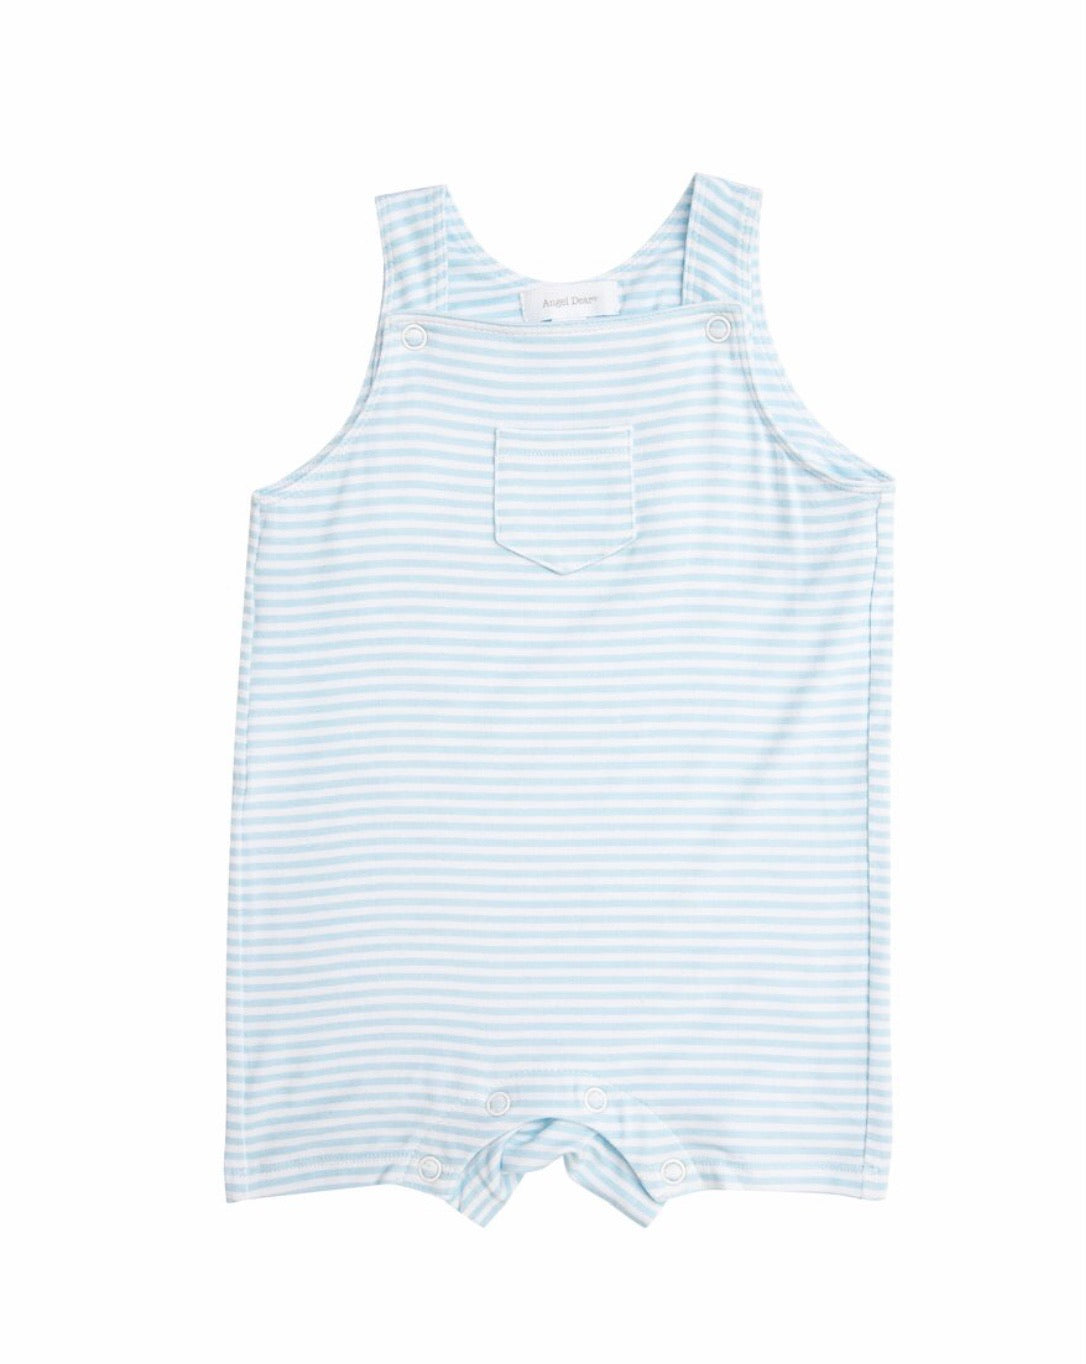 Overall Shortall in Blue Puppy Play Stripe  - Doodlebug's Children's Boutique